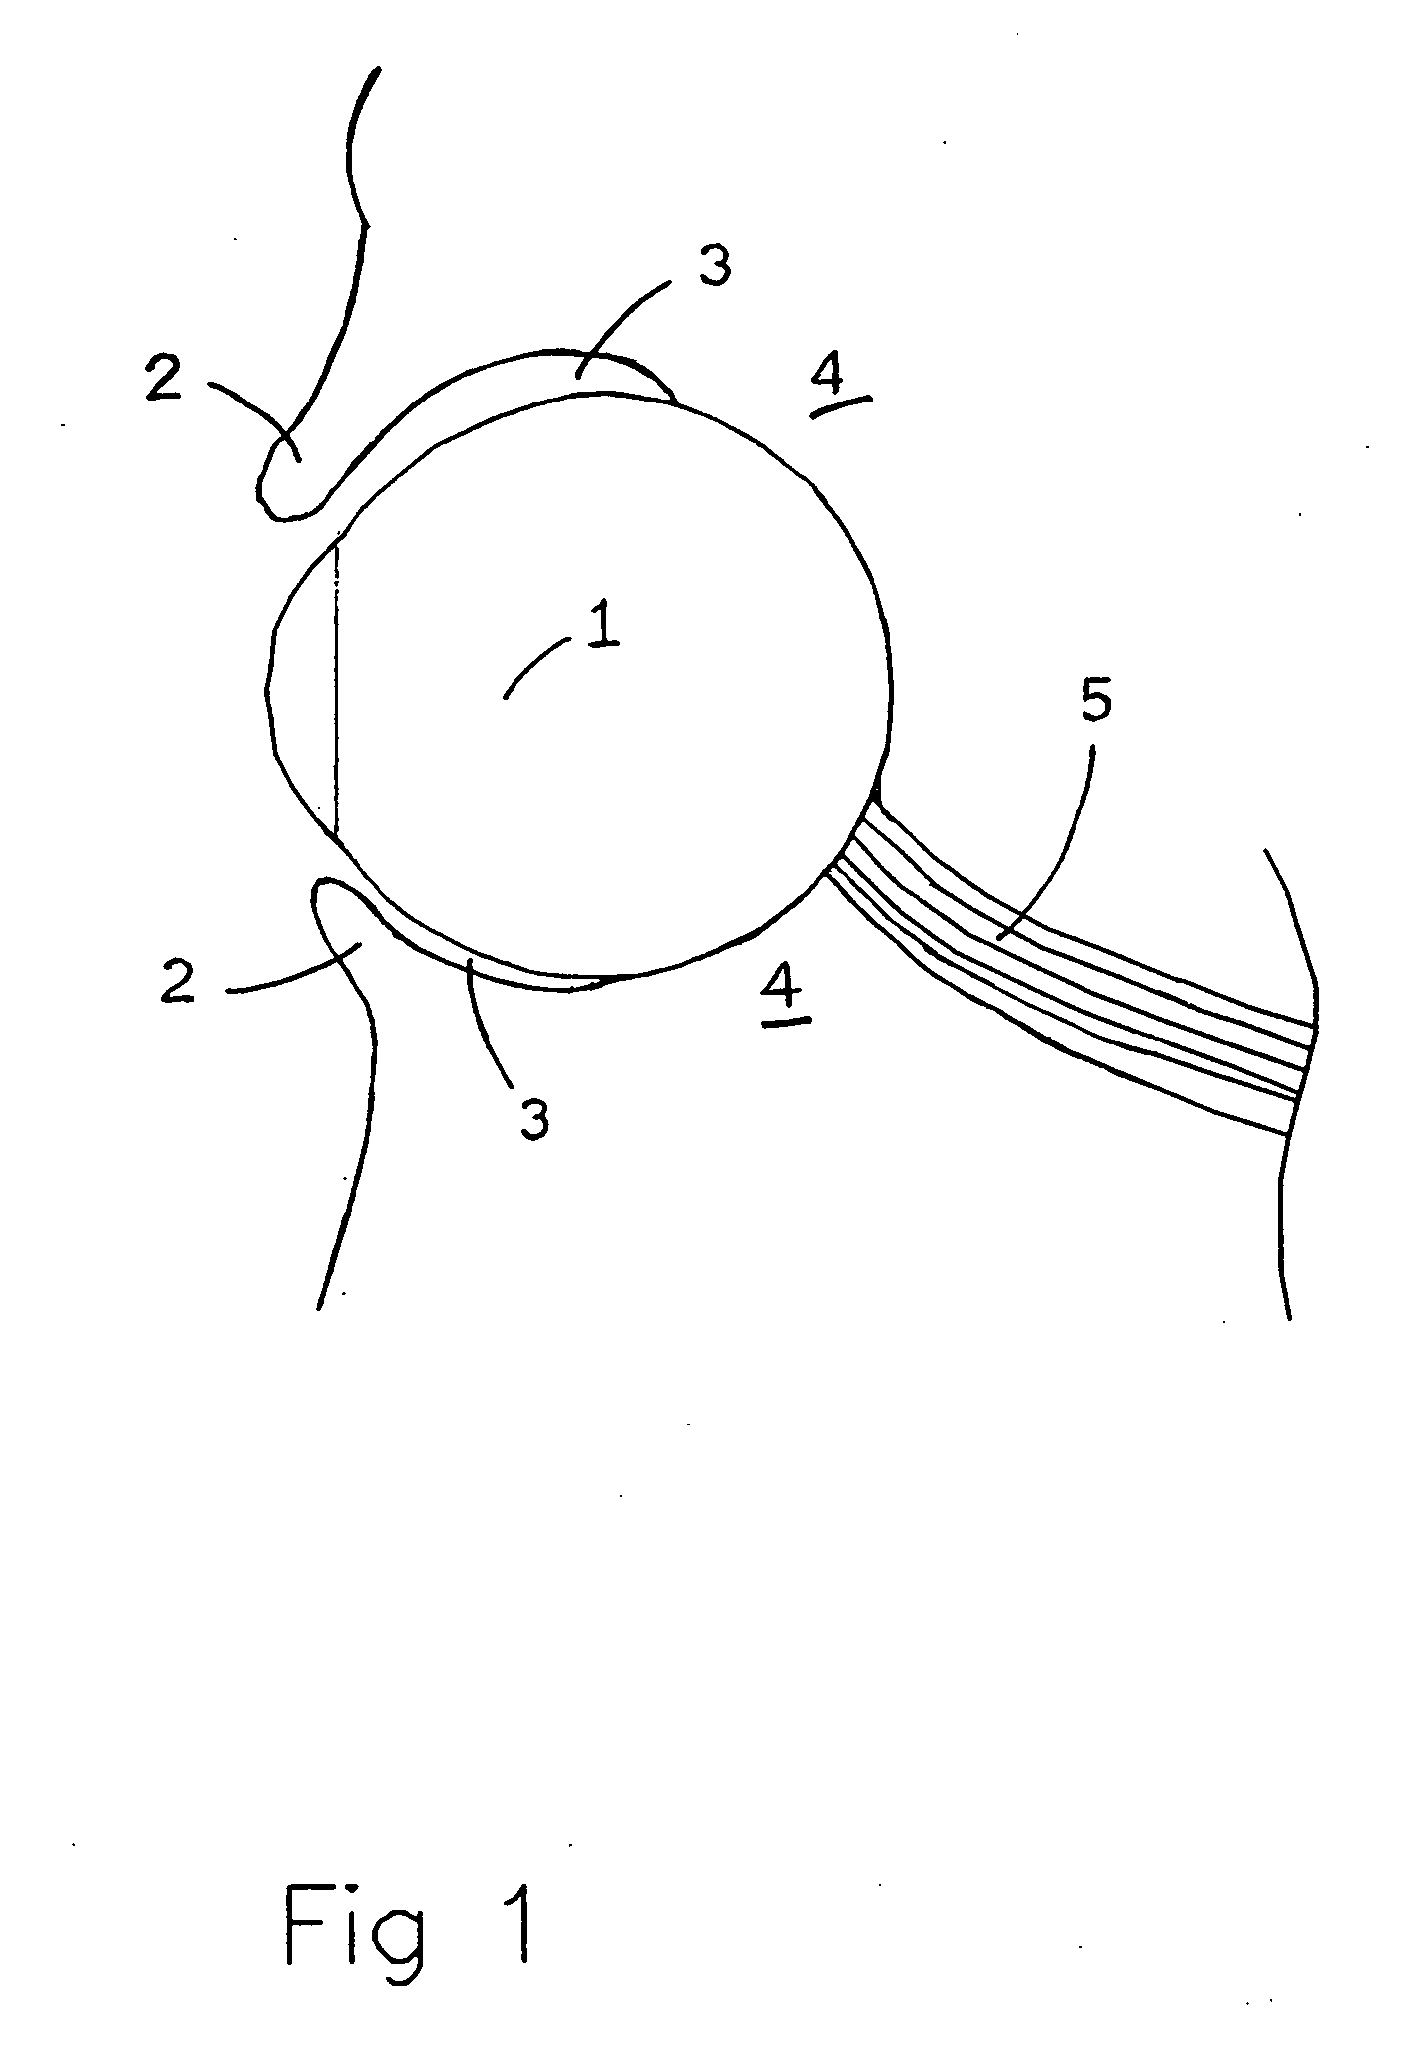 Medical device and method for temperature control and treatment of the eye and surrounding tissues